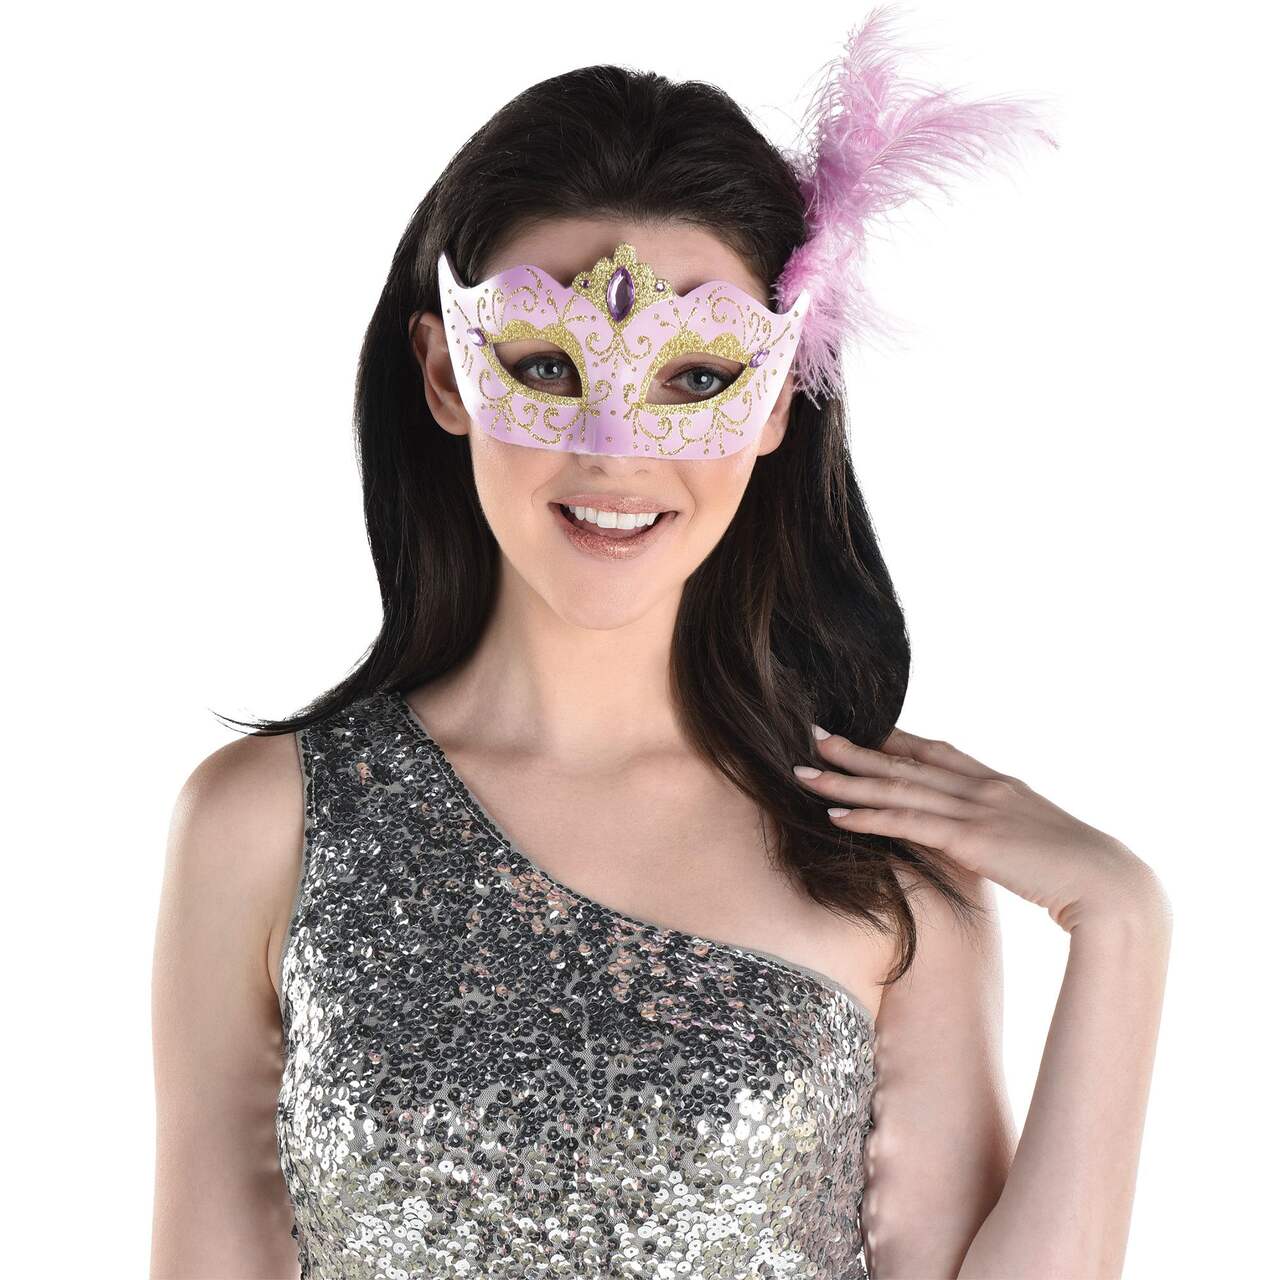 Light-Up Fiber Optic Feather Masquerade Mask, Pink, One Size